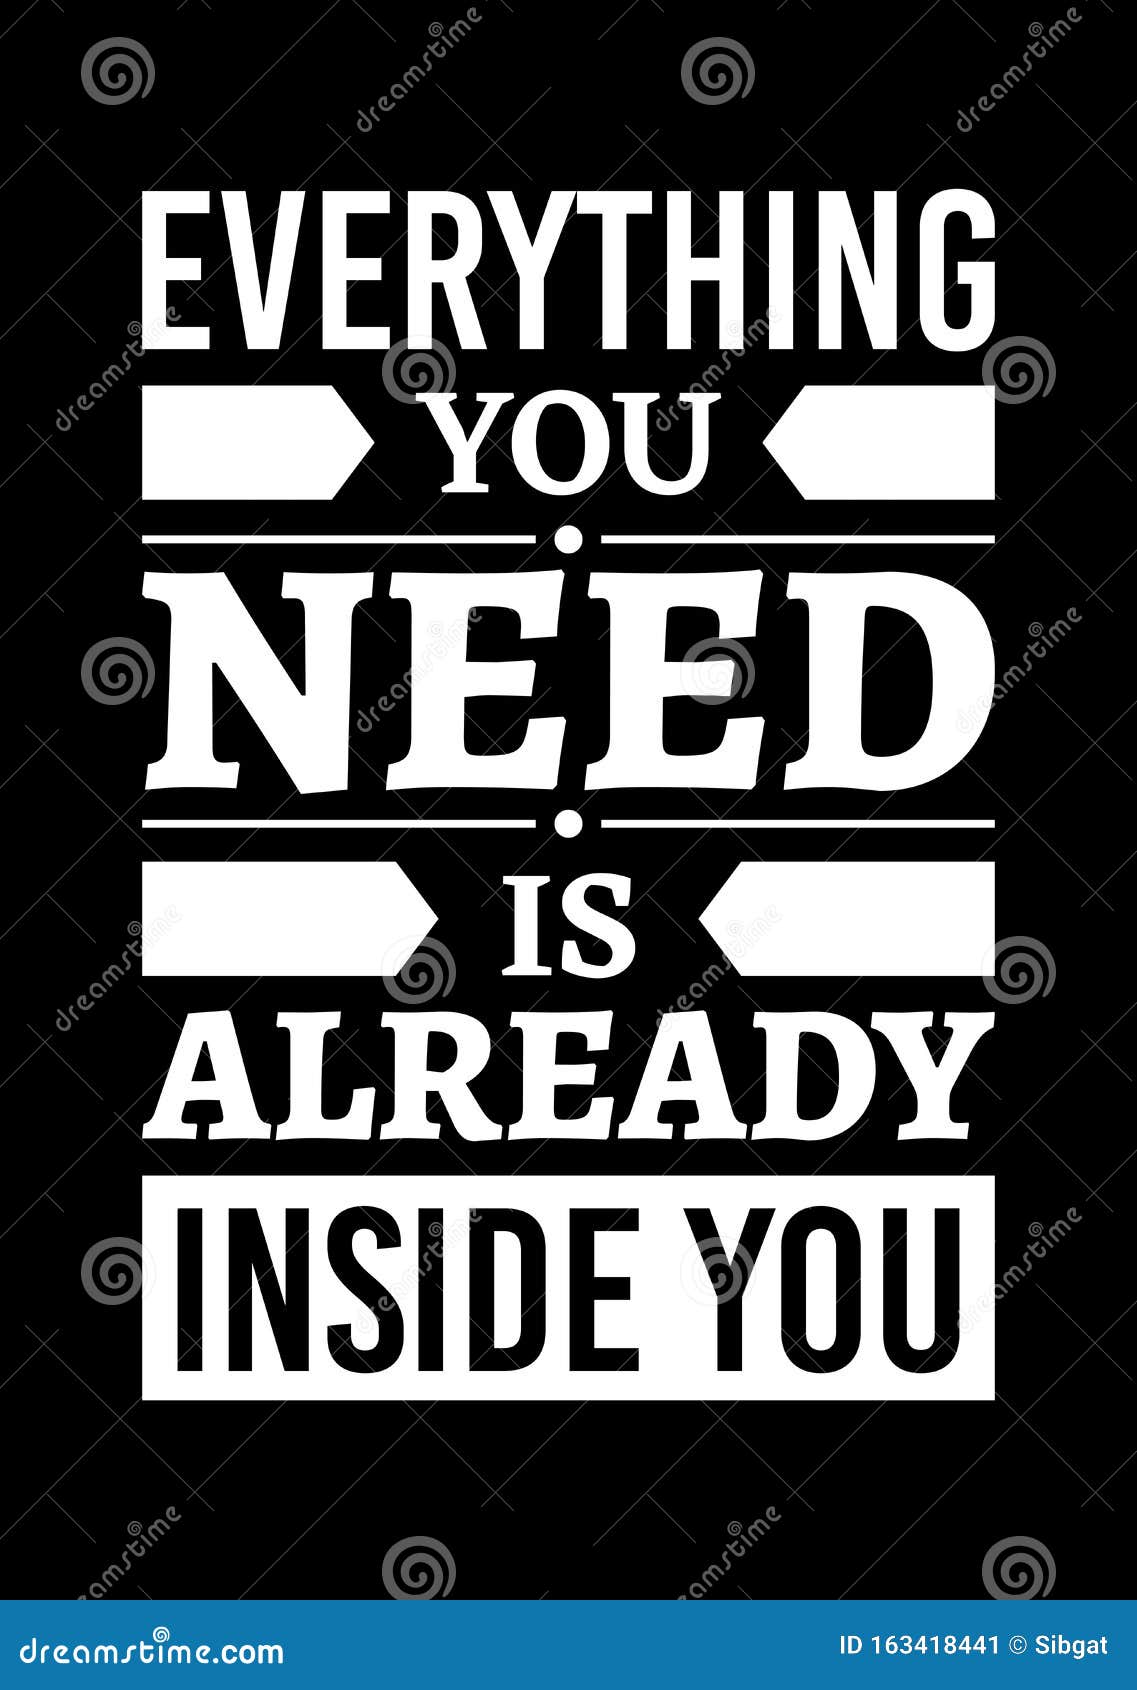 motivational poster. everything you need is already inside you. home decor for good self-esteem